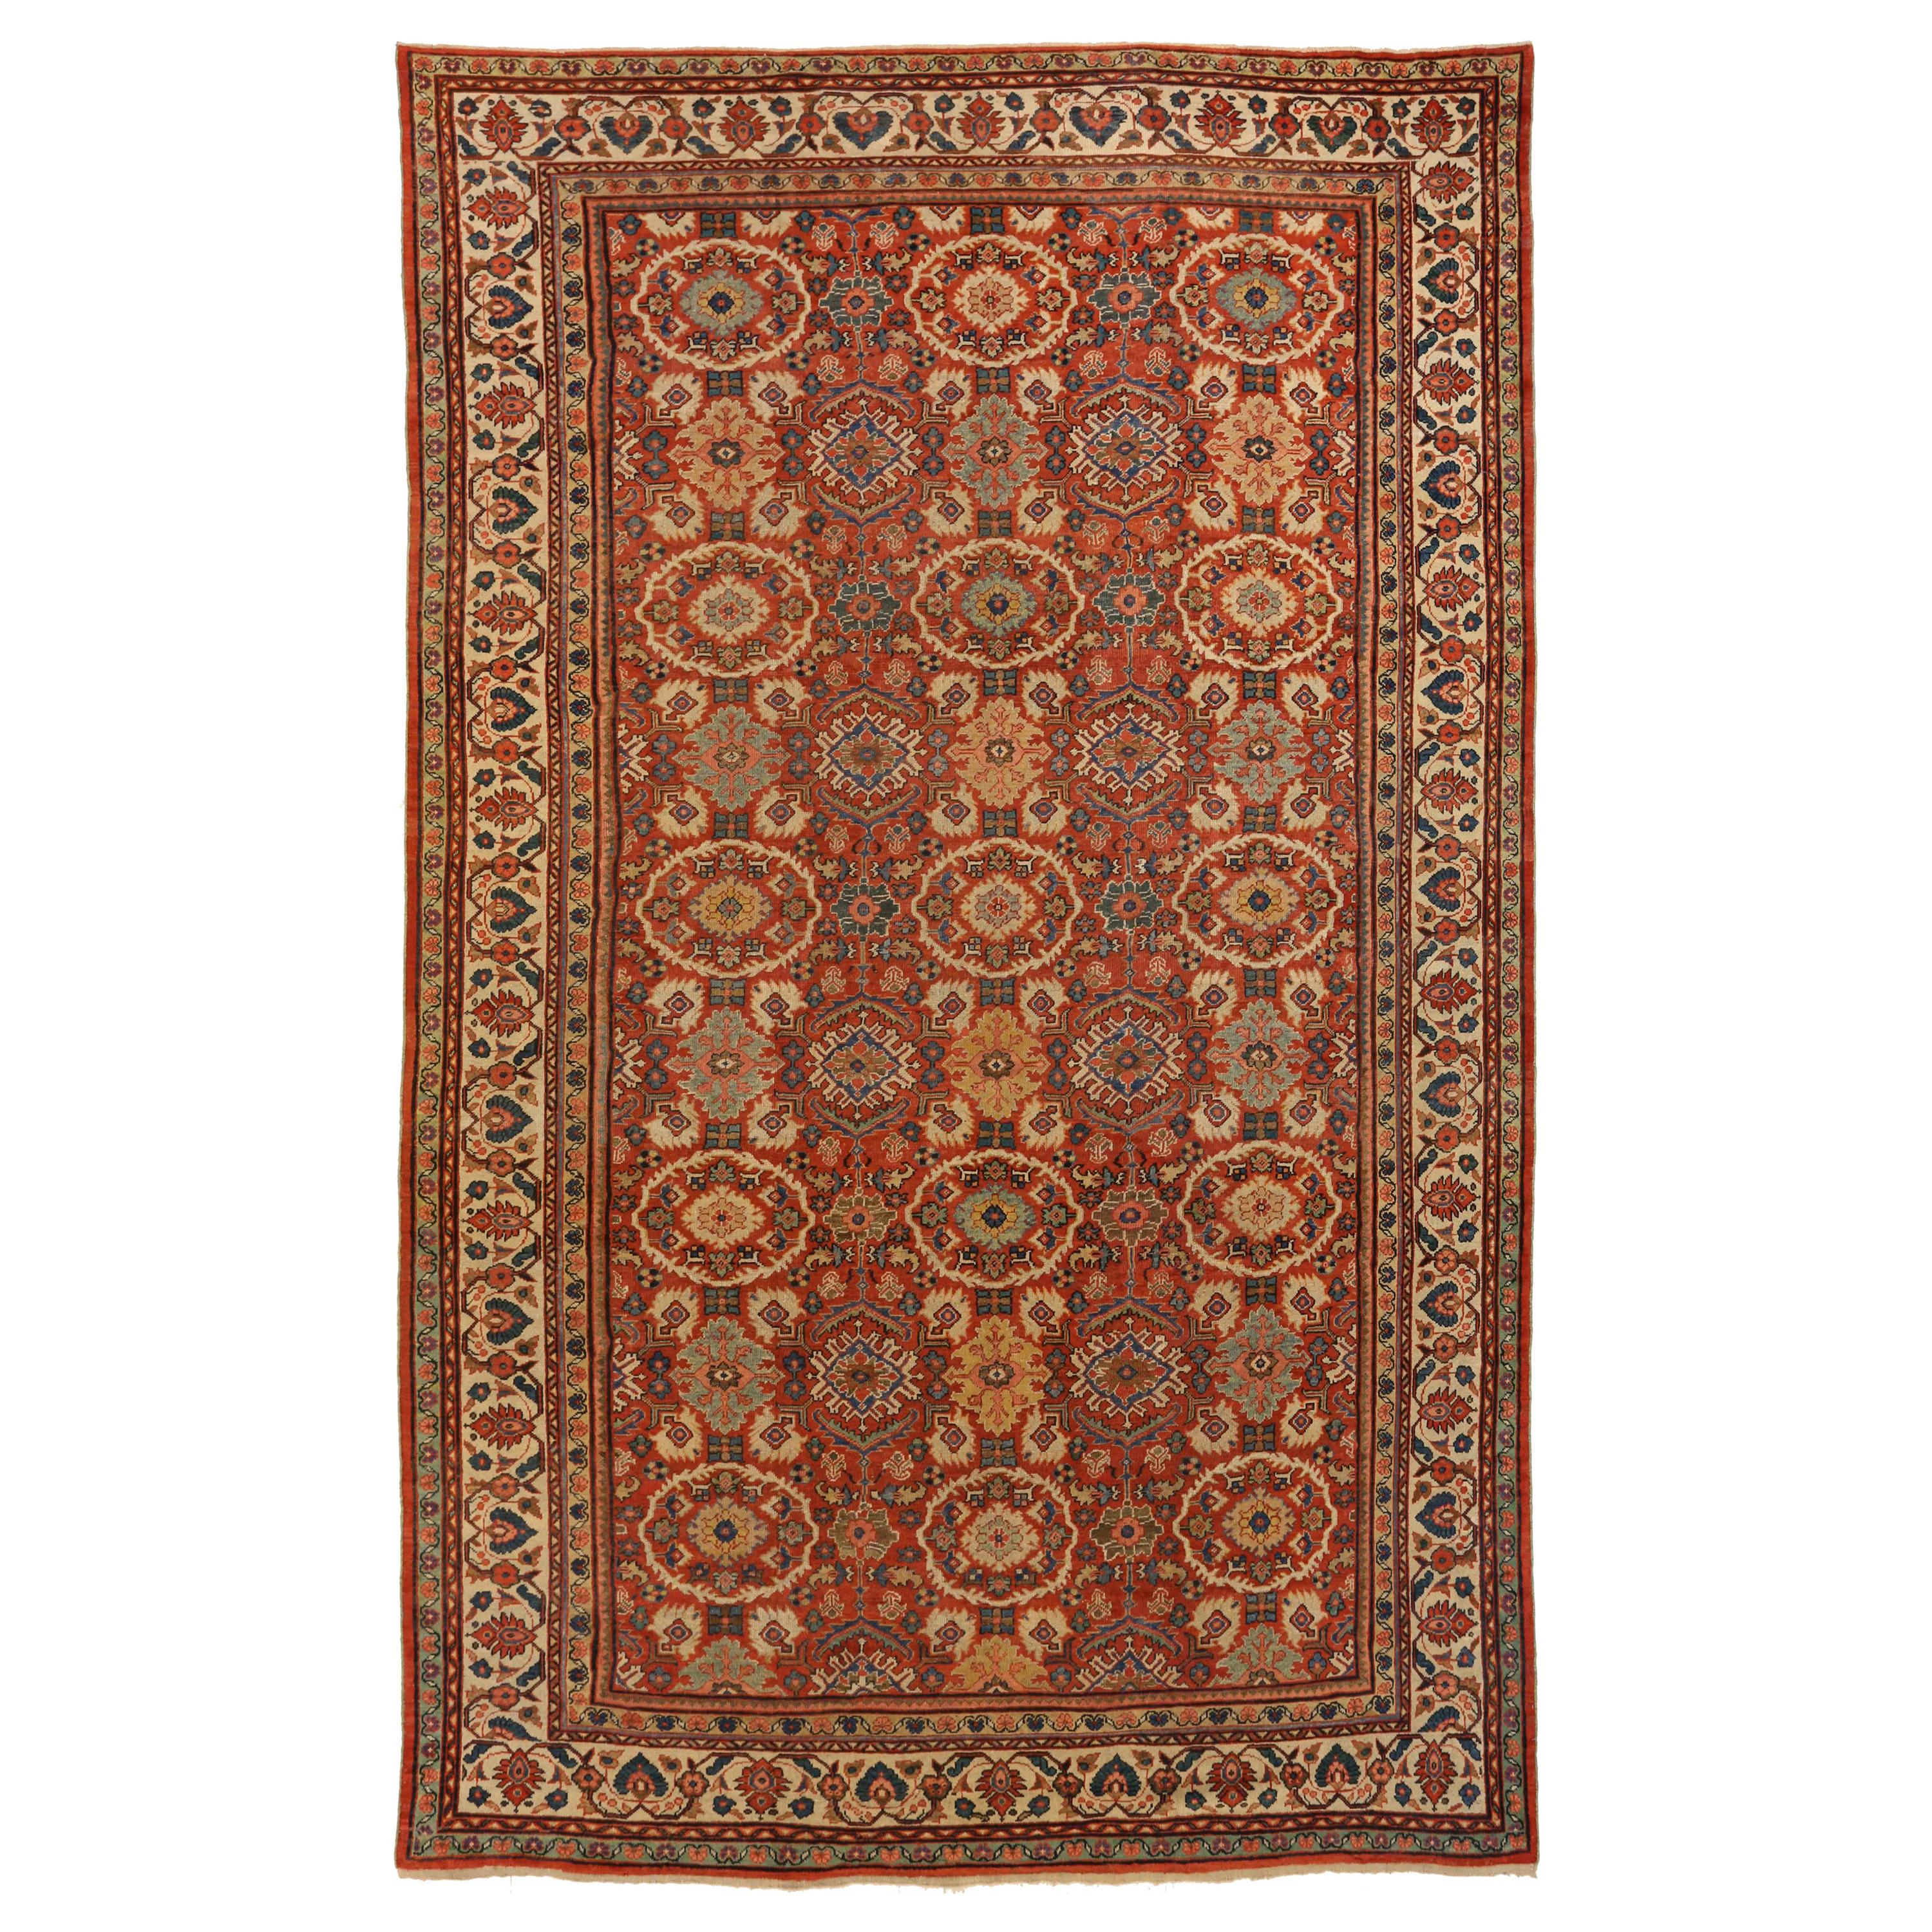 1930s Antique Sultanabad Persian Rug with Oval Floral Patterns in Ivory and Red For Sale